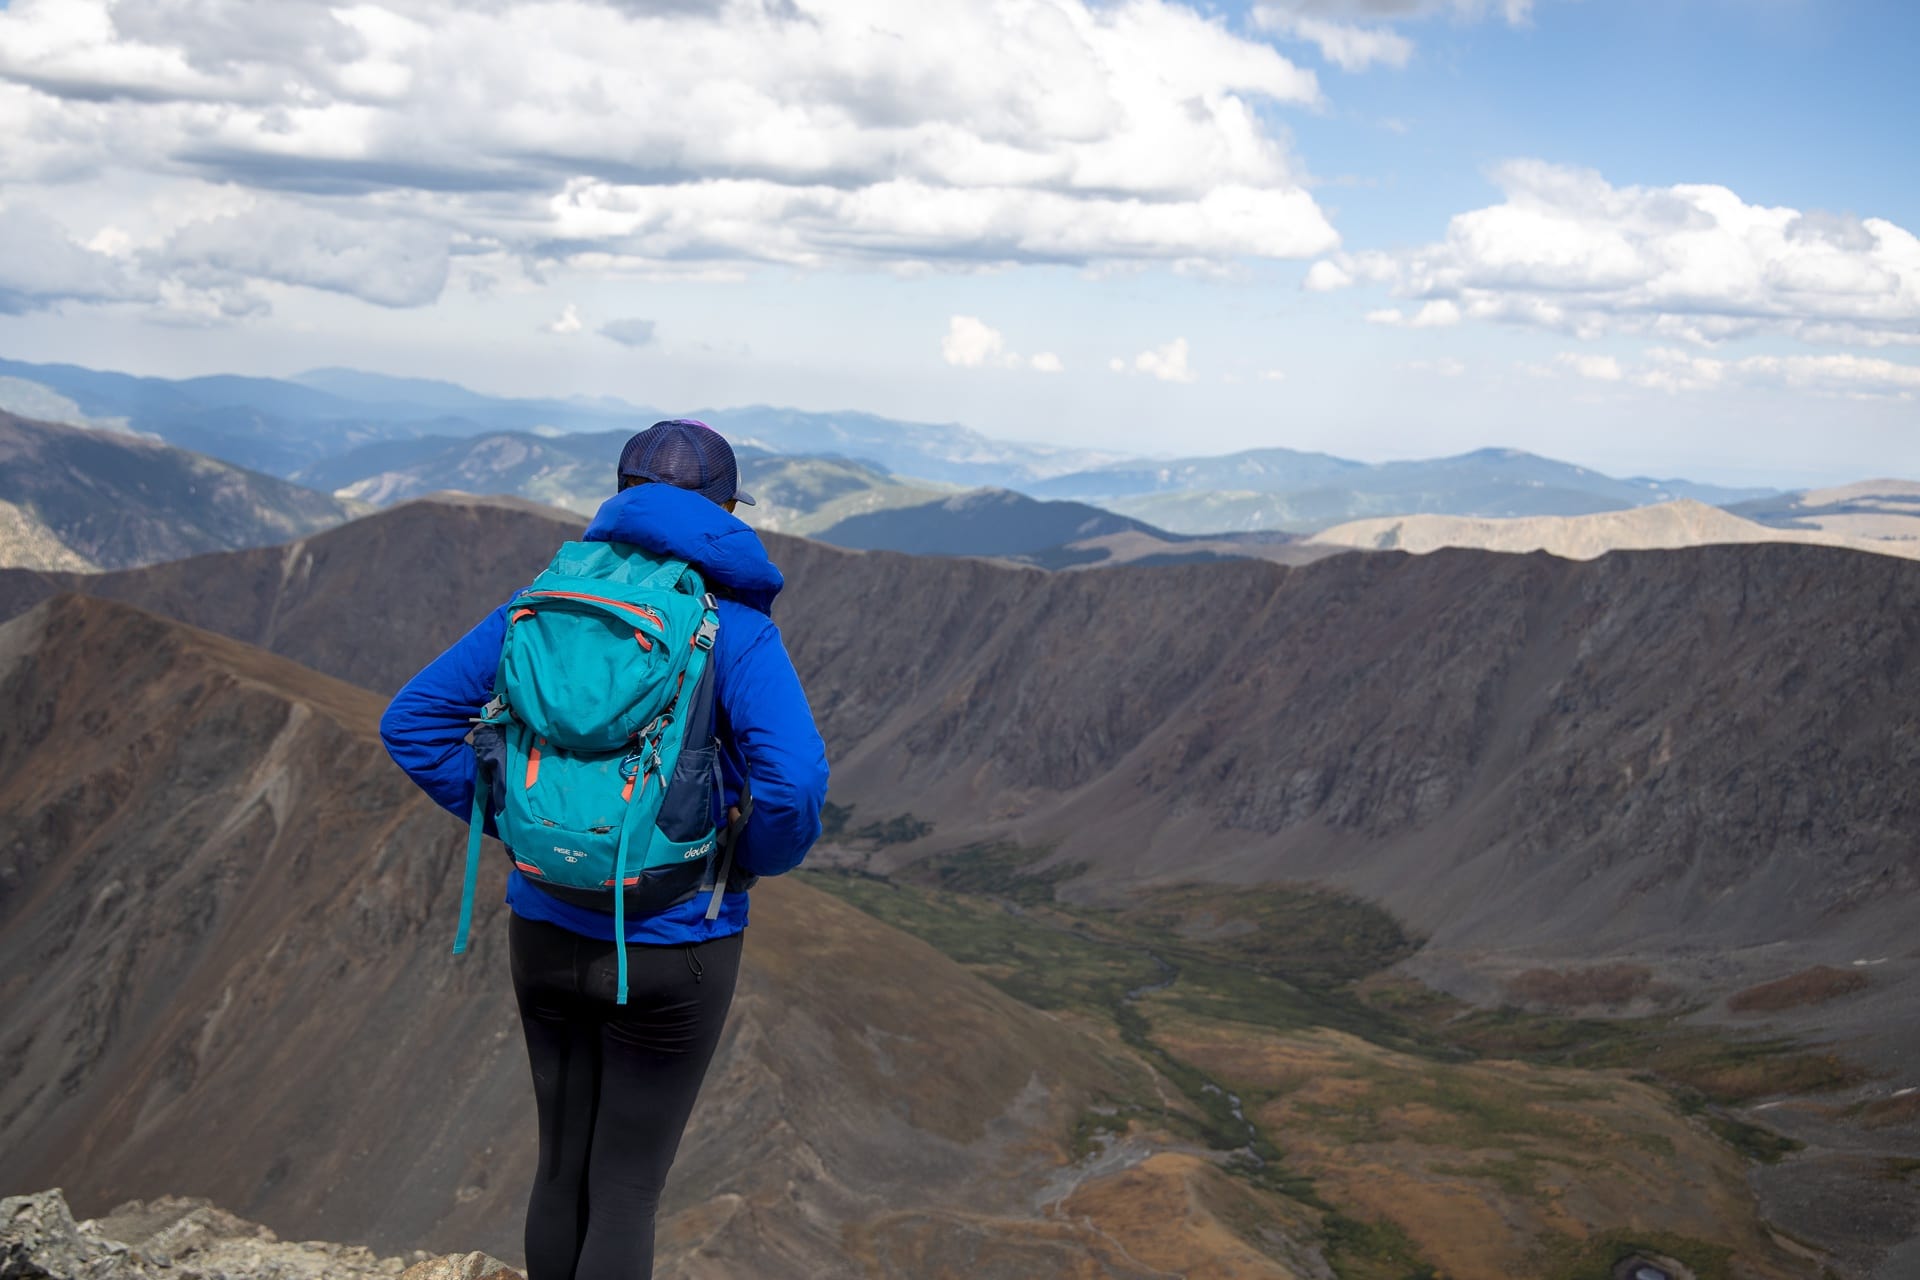 Female hiker standing on top of mountain looking out over nearby mountain ranges. She's wearing a blue jacket and blue hiking day pack.